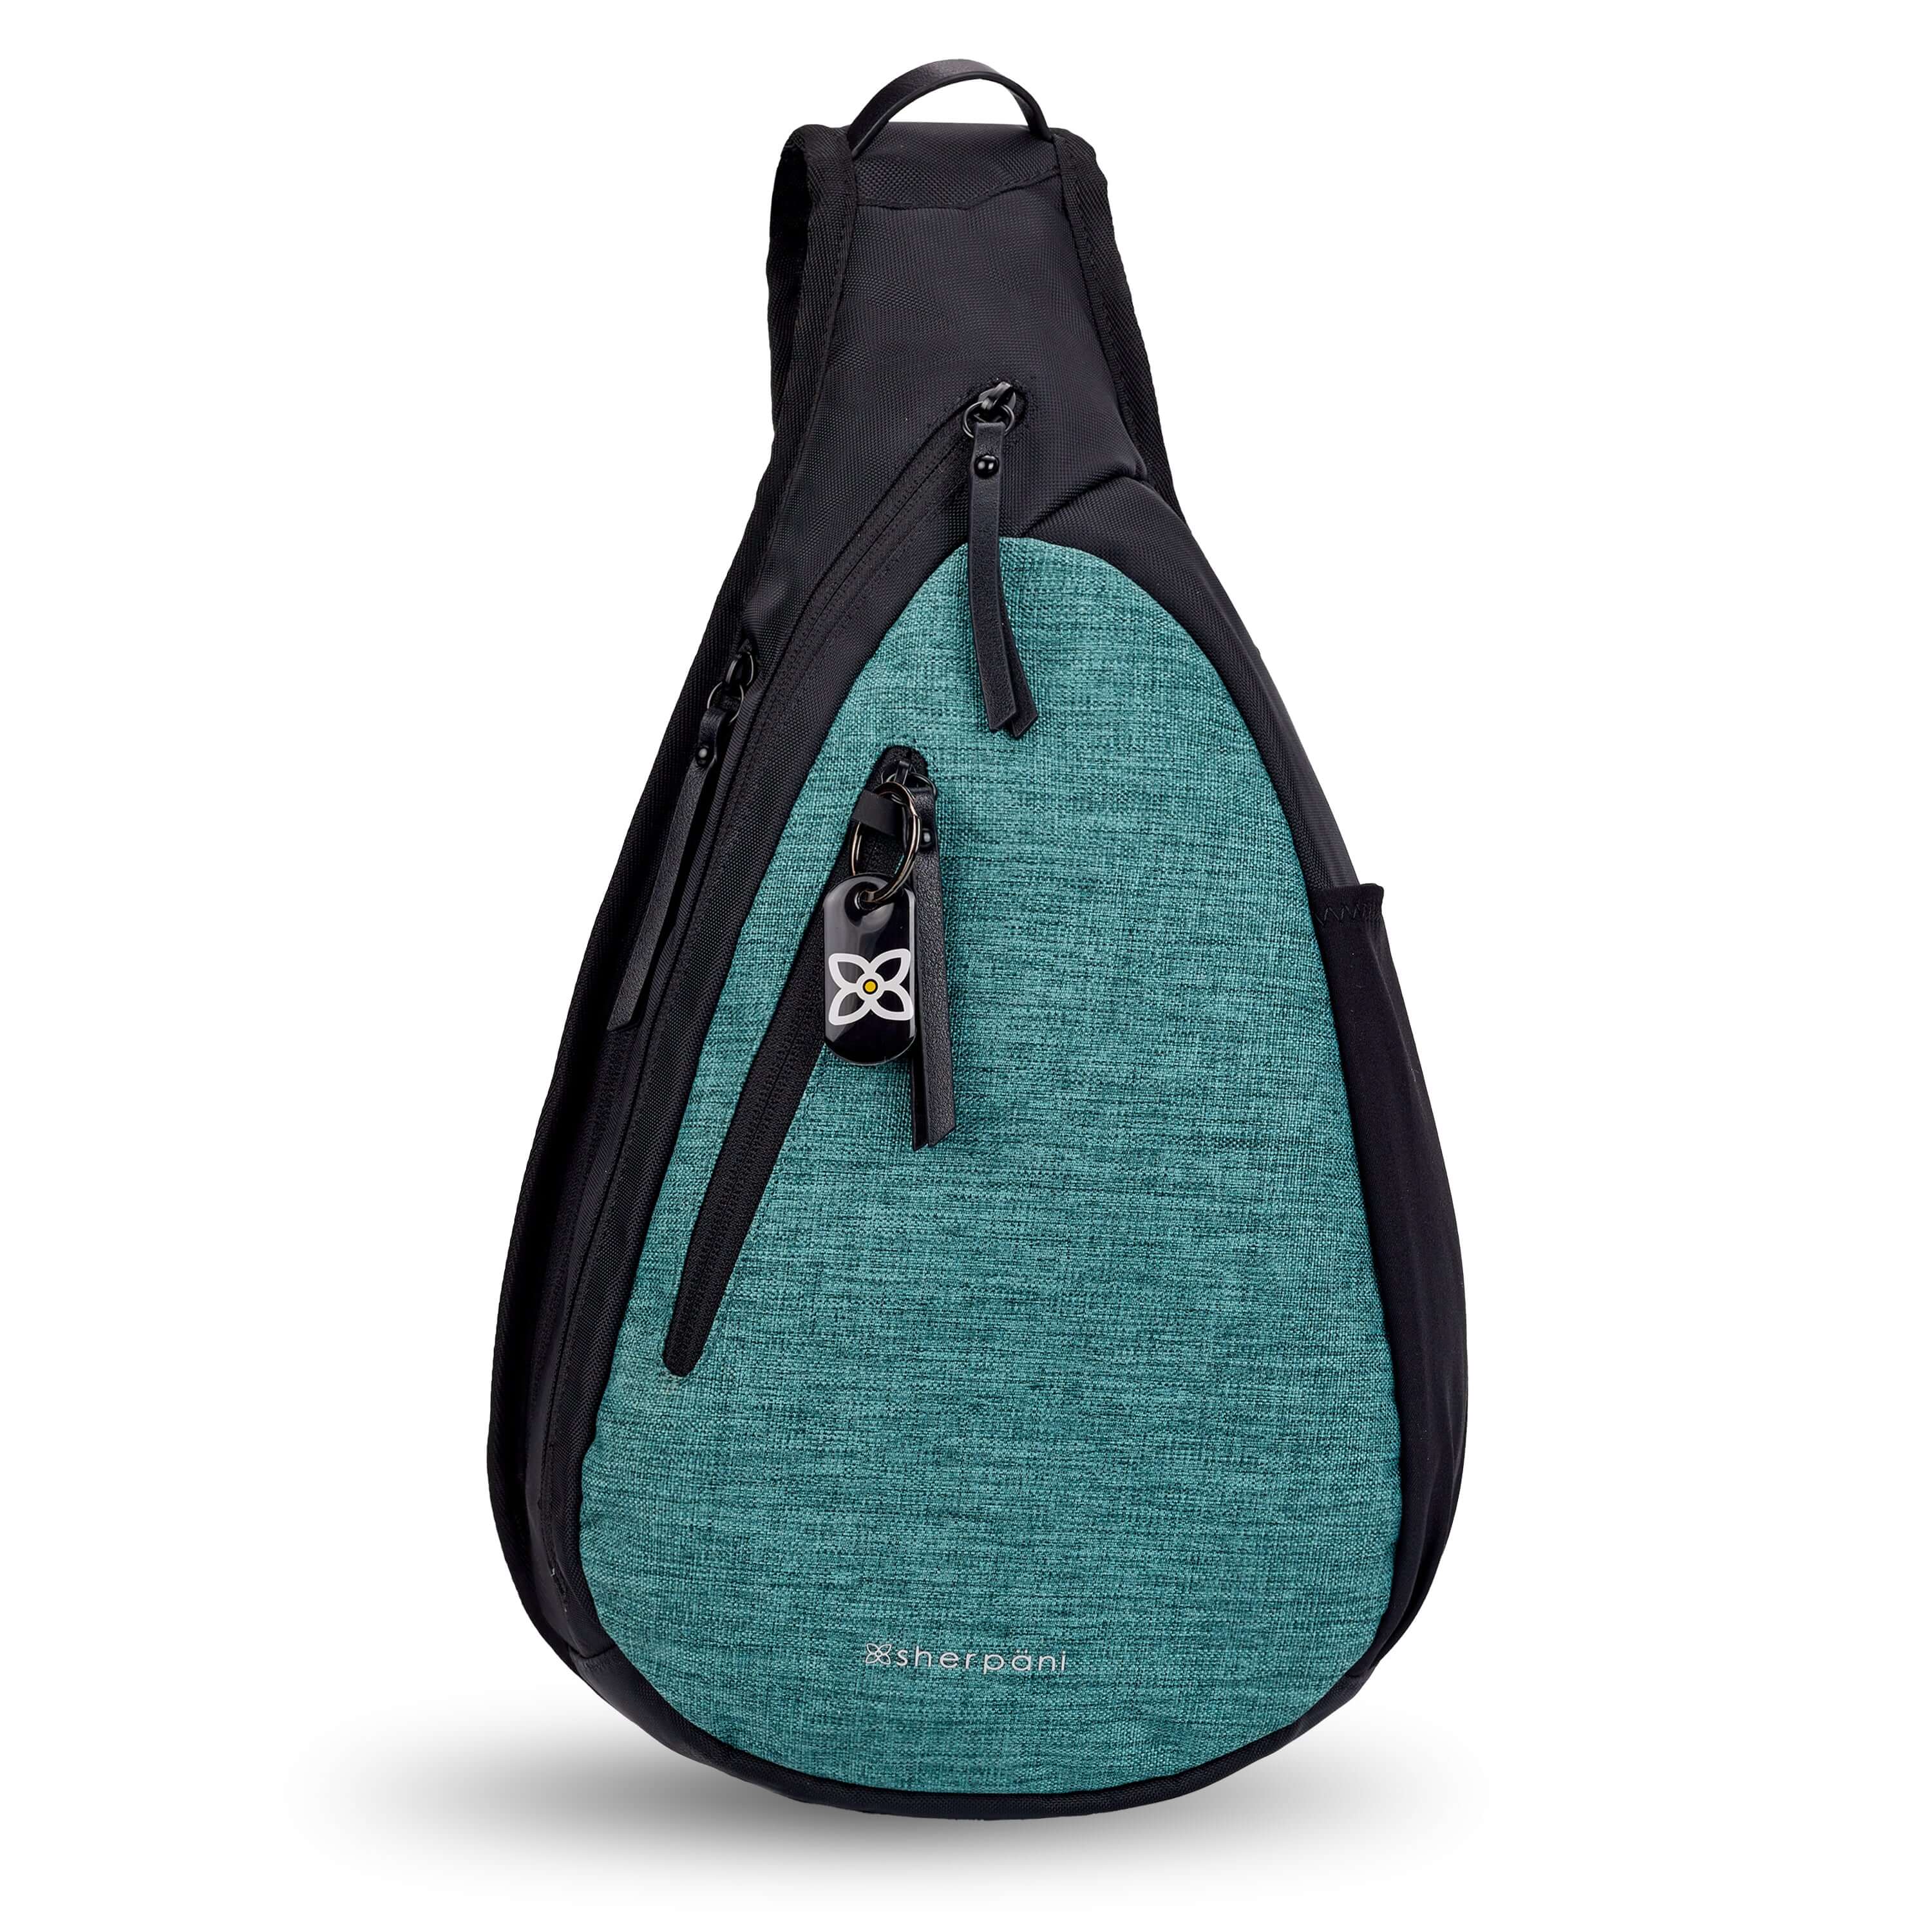 Flat front view of Sherpani&#39;s Anti-Theft bag, the Esprit AT in Teal, with vegan leather accents in black. There is a locking zipper compartment on the front, and two more zipper compartments on the side. An elastic water bottle holder sits on the other side of the bag.